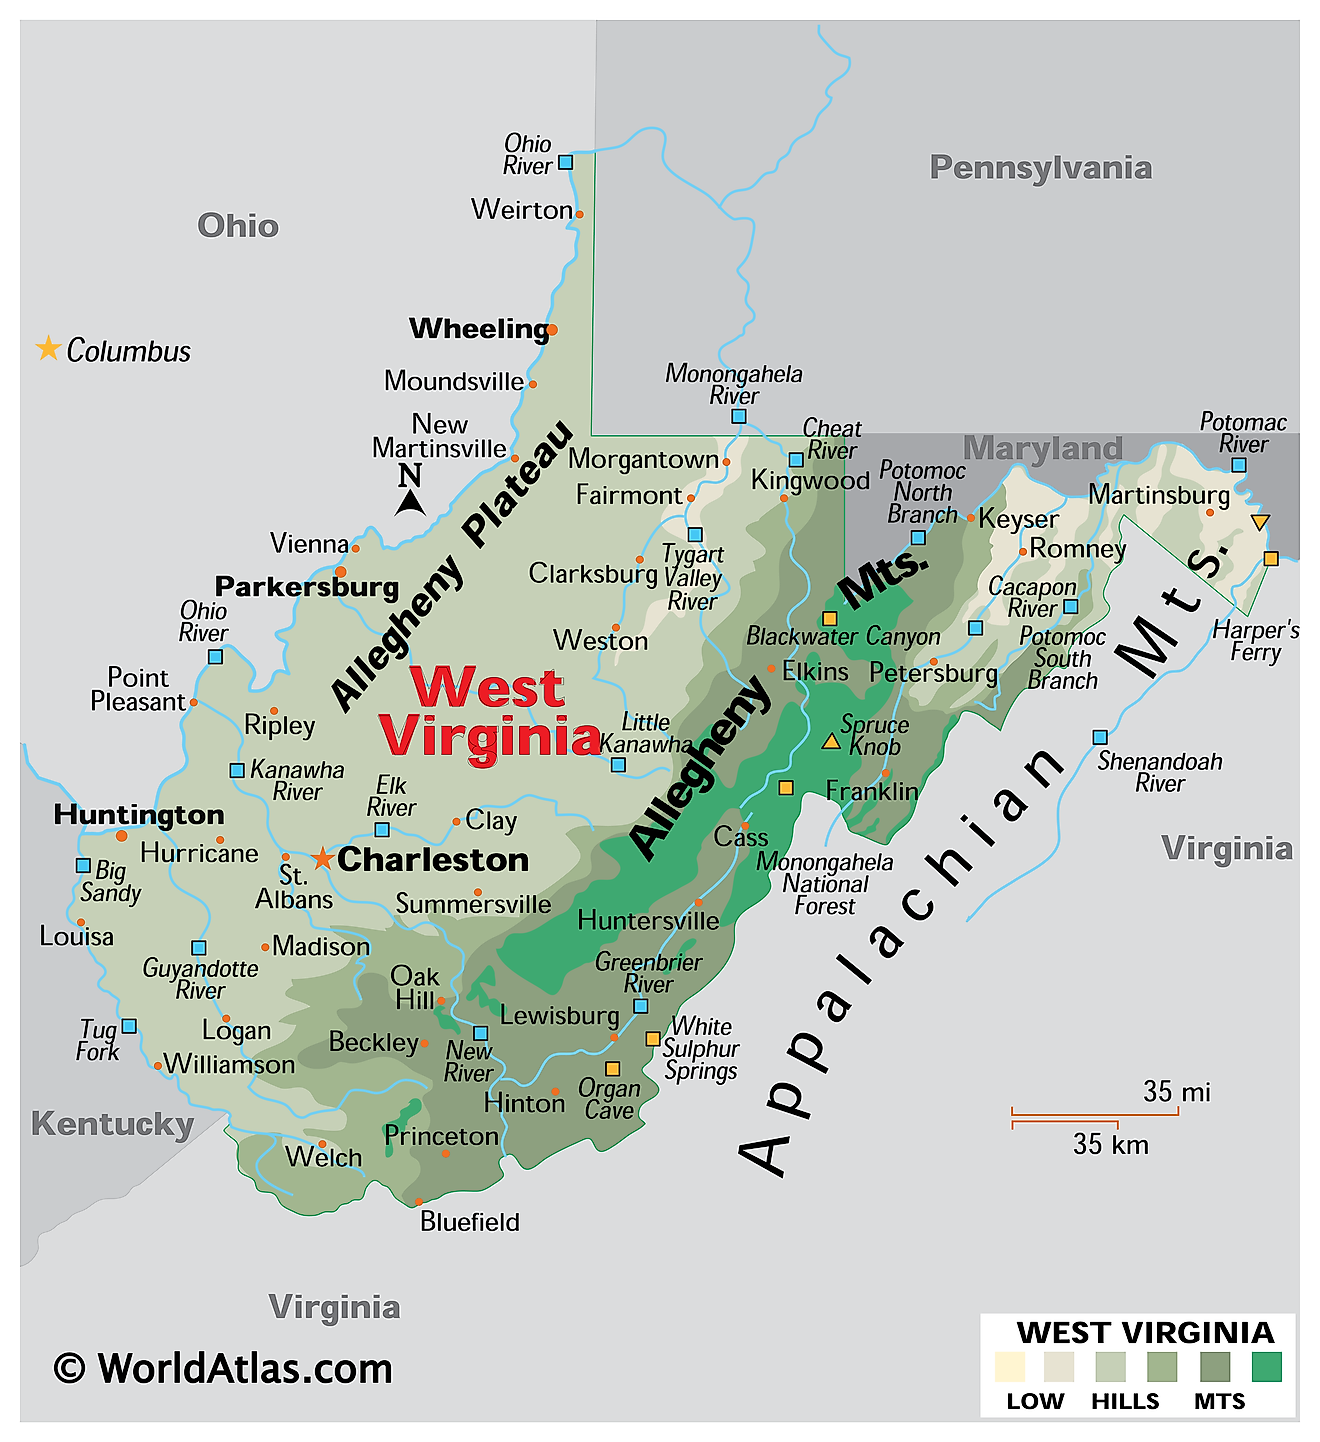 Physical Map of West Virginia. It shows the physical features of West Virginia including its mountain ranges, plateaus and major rivers.